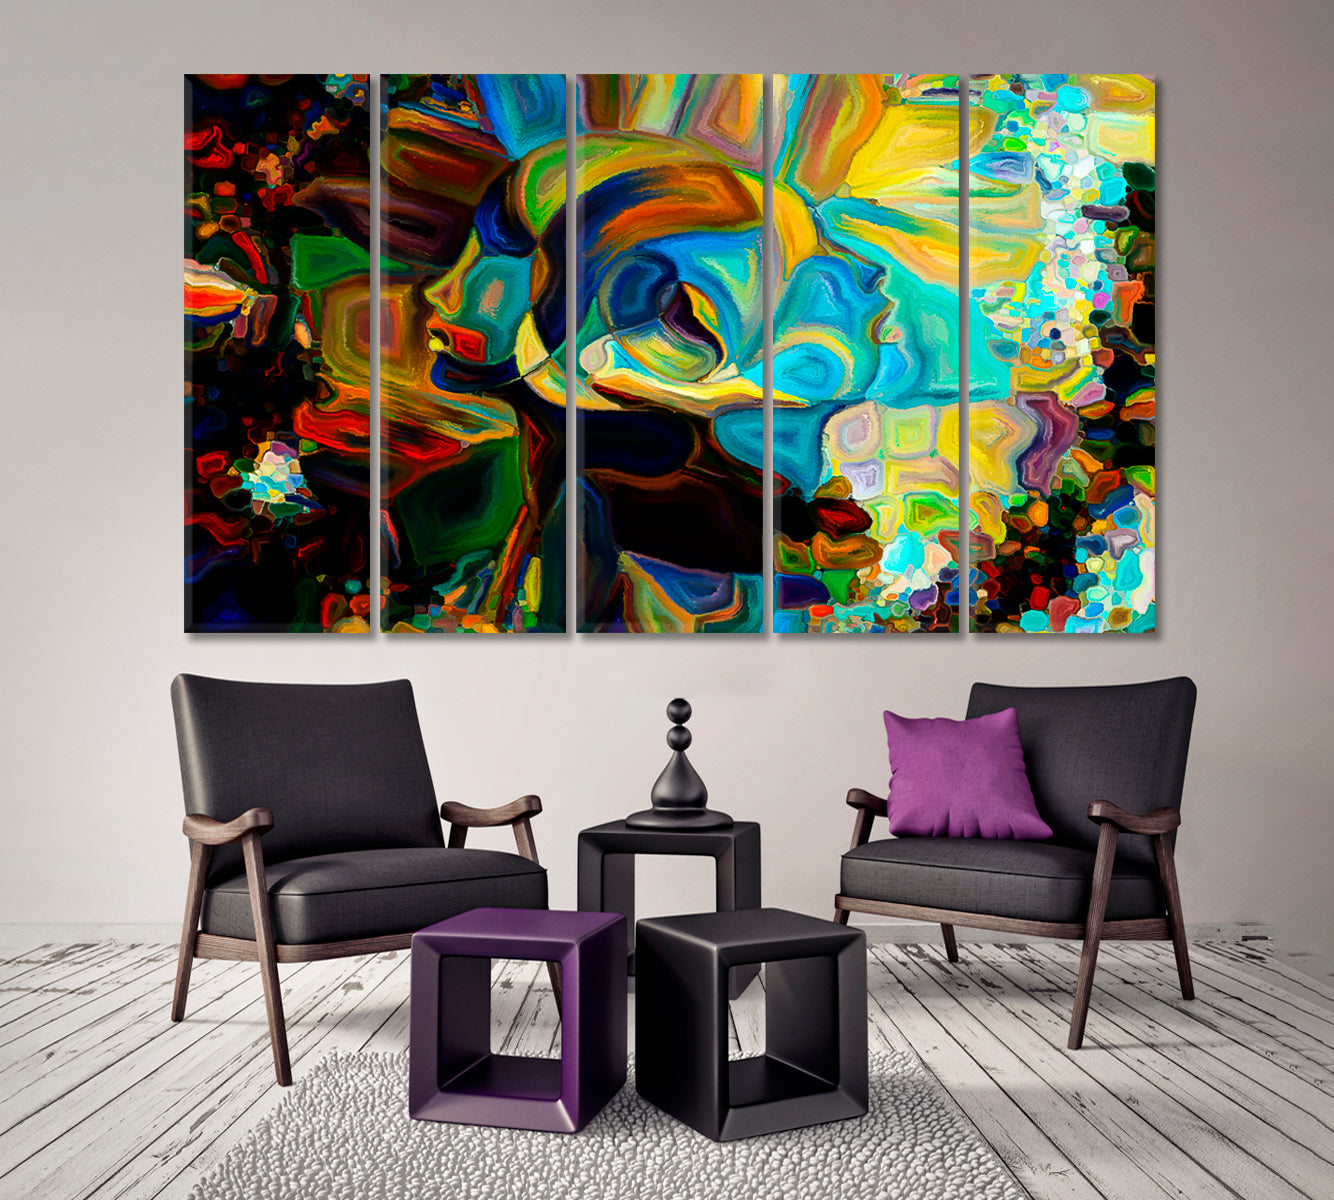 Peaceful Coexistence in Colors and Shapes Abstract Art Print Artesty 5 panels 36" x 24" 